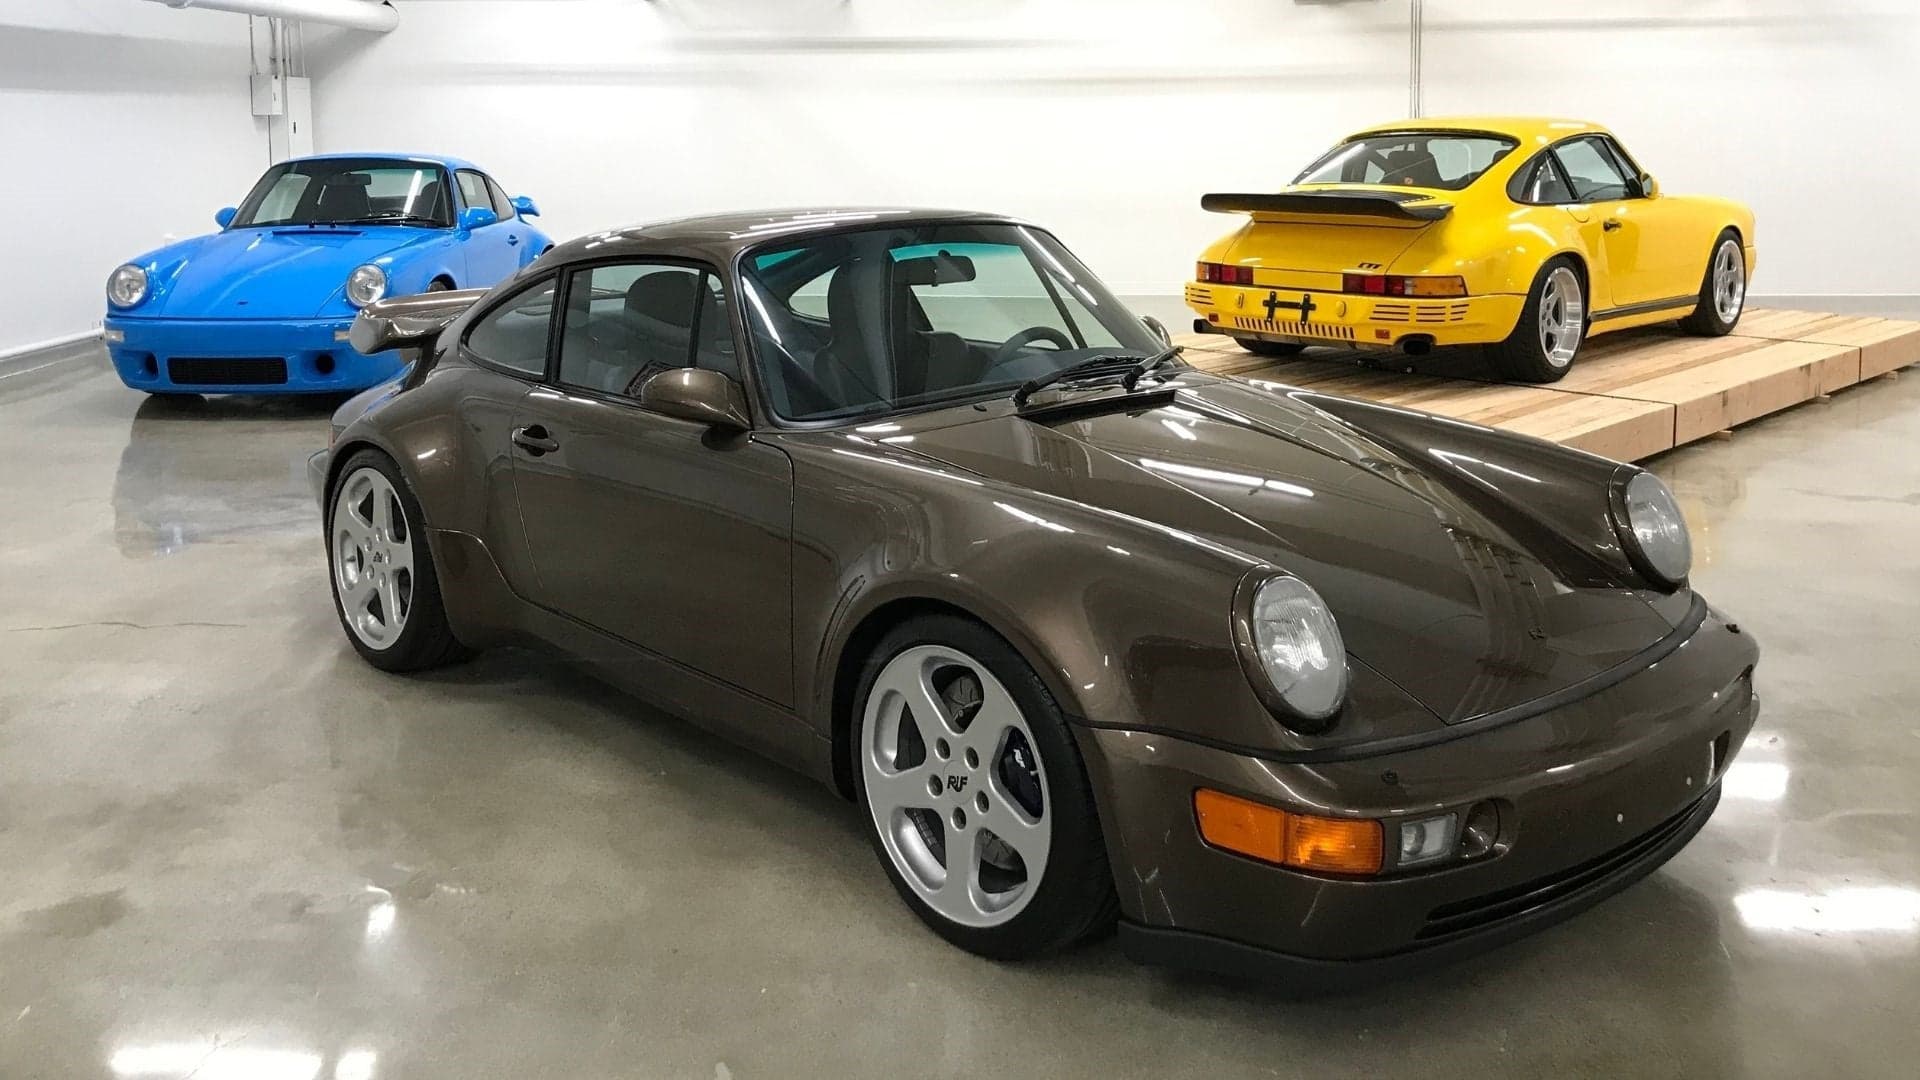 Now’s Your Chance to See Eight Rare Ruf Models All Together